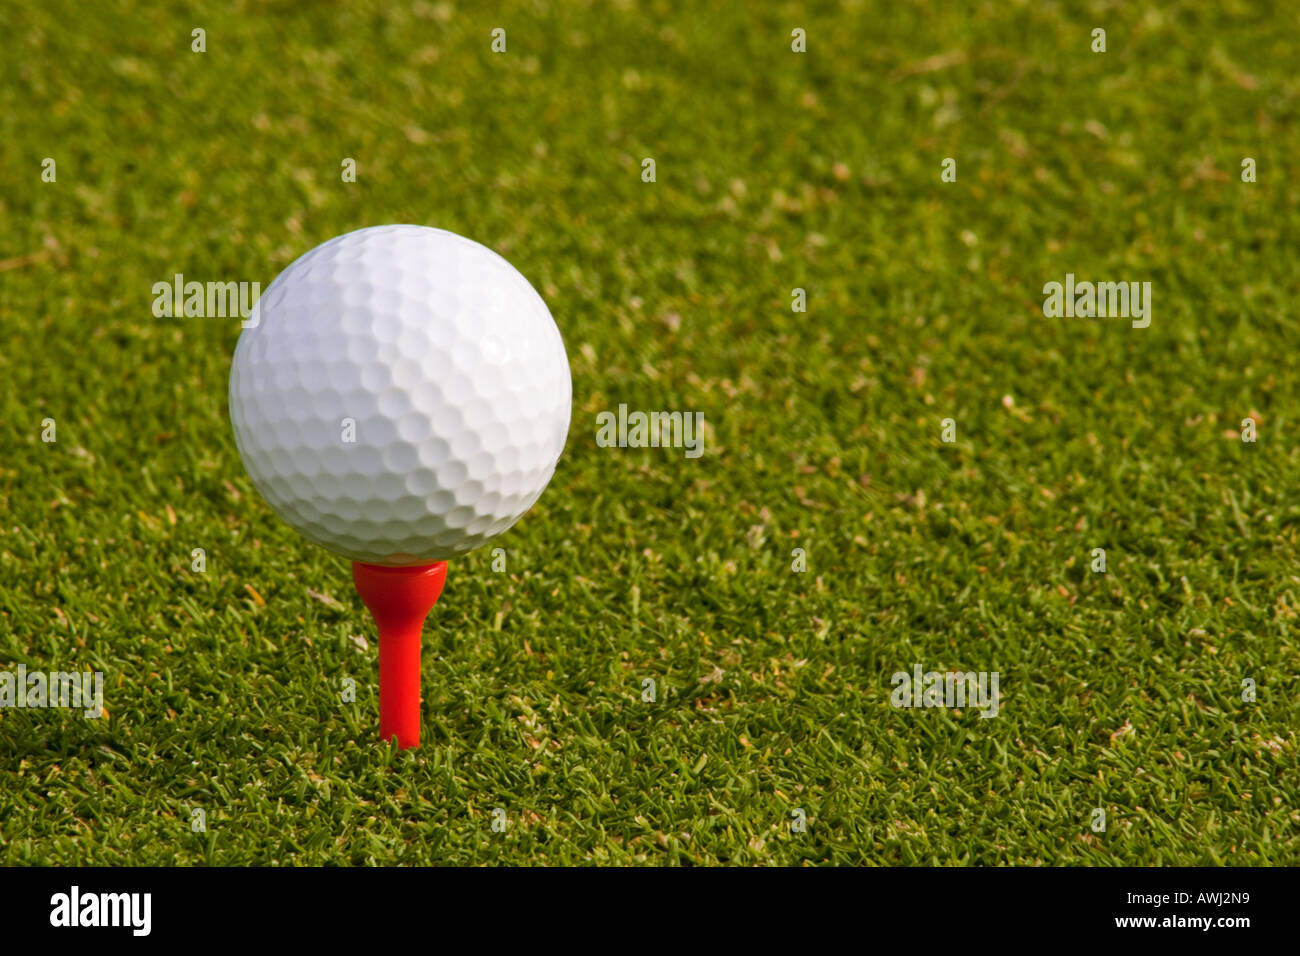 Golf Ball on Tee golf ball on tee ready shot chip whack hit crack smash  still steady balance green off grass red side close up Stock Photo - Alamy